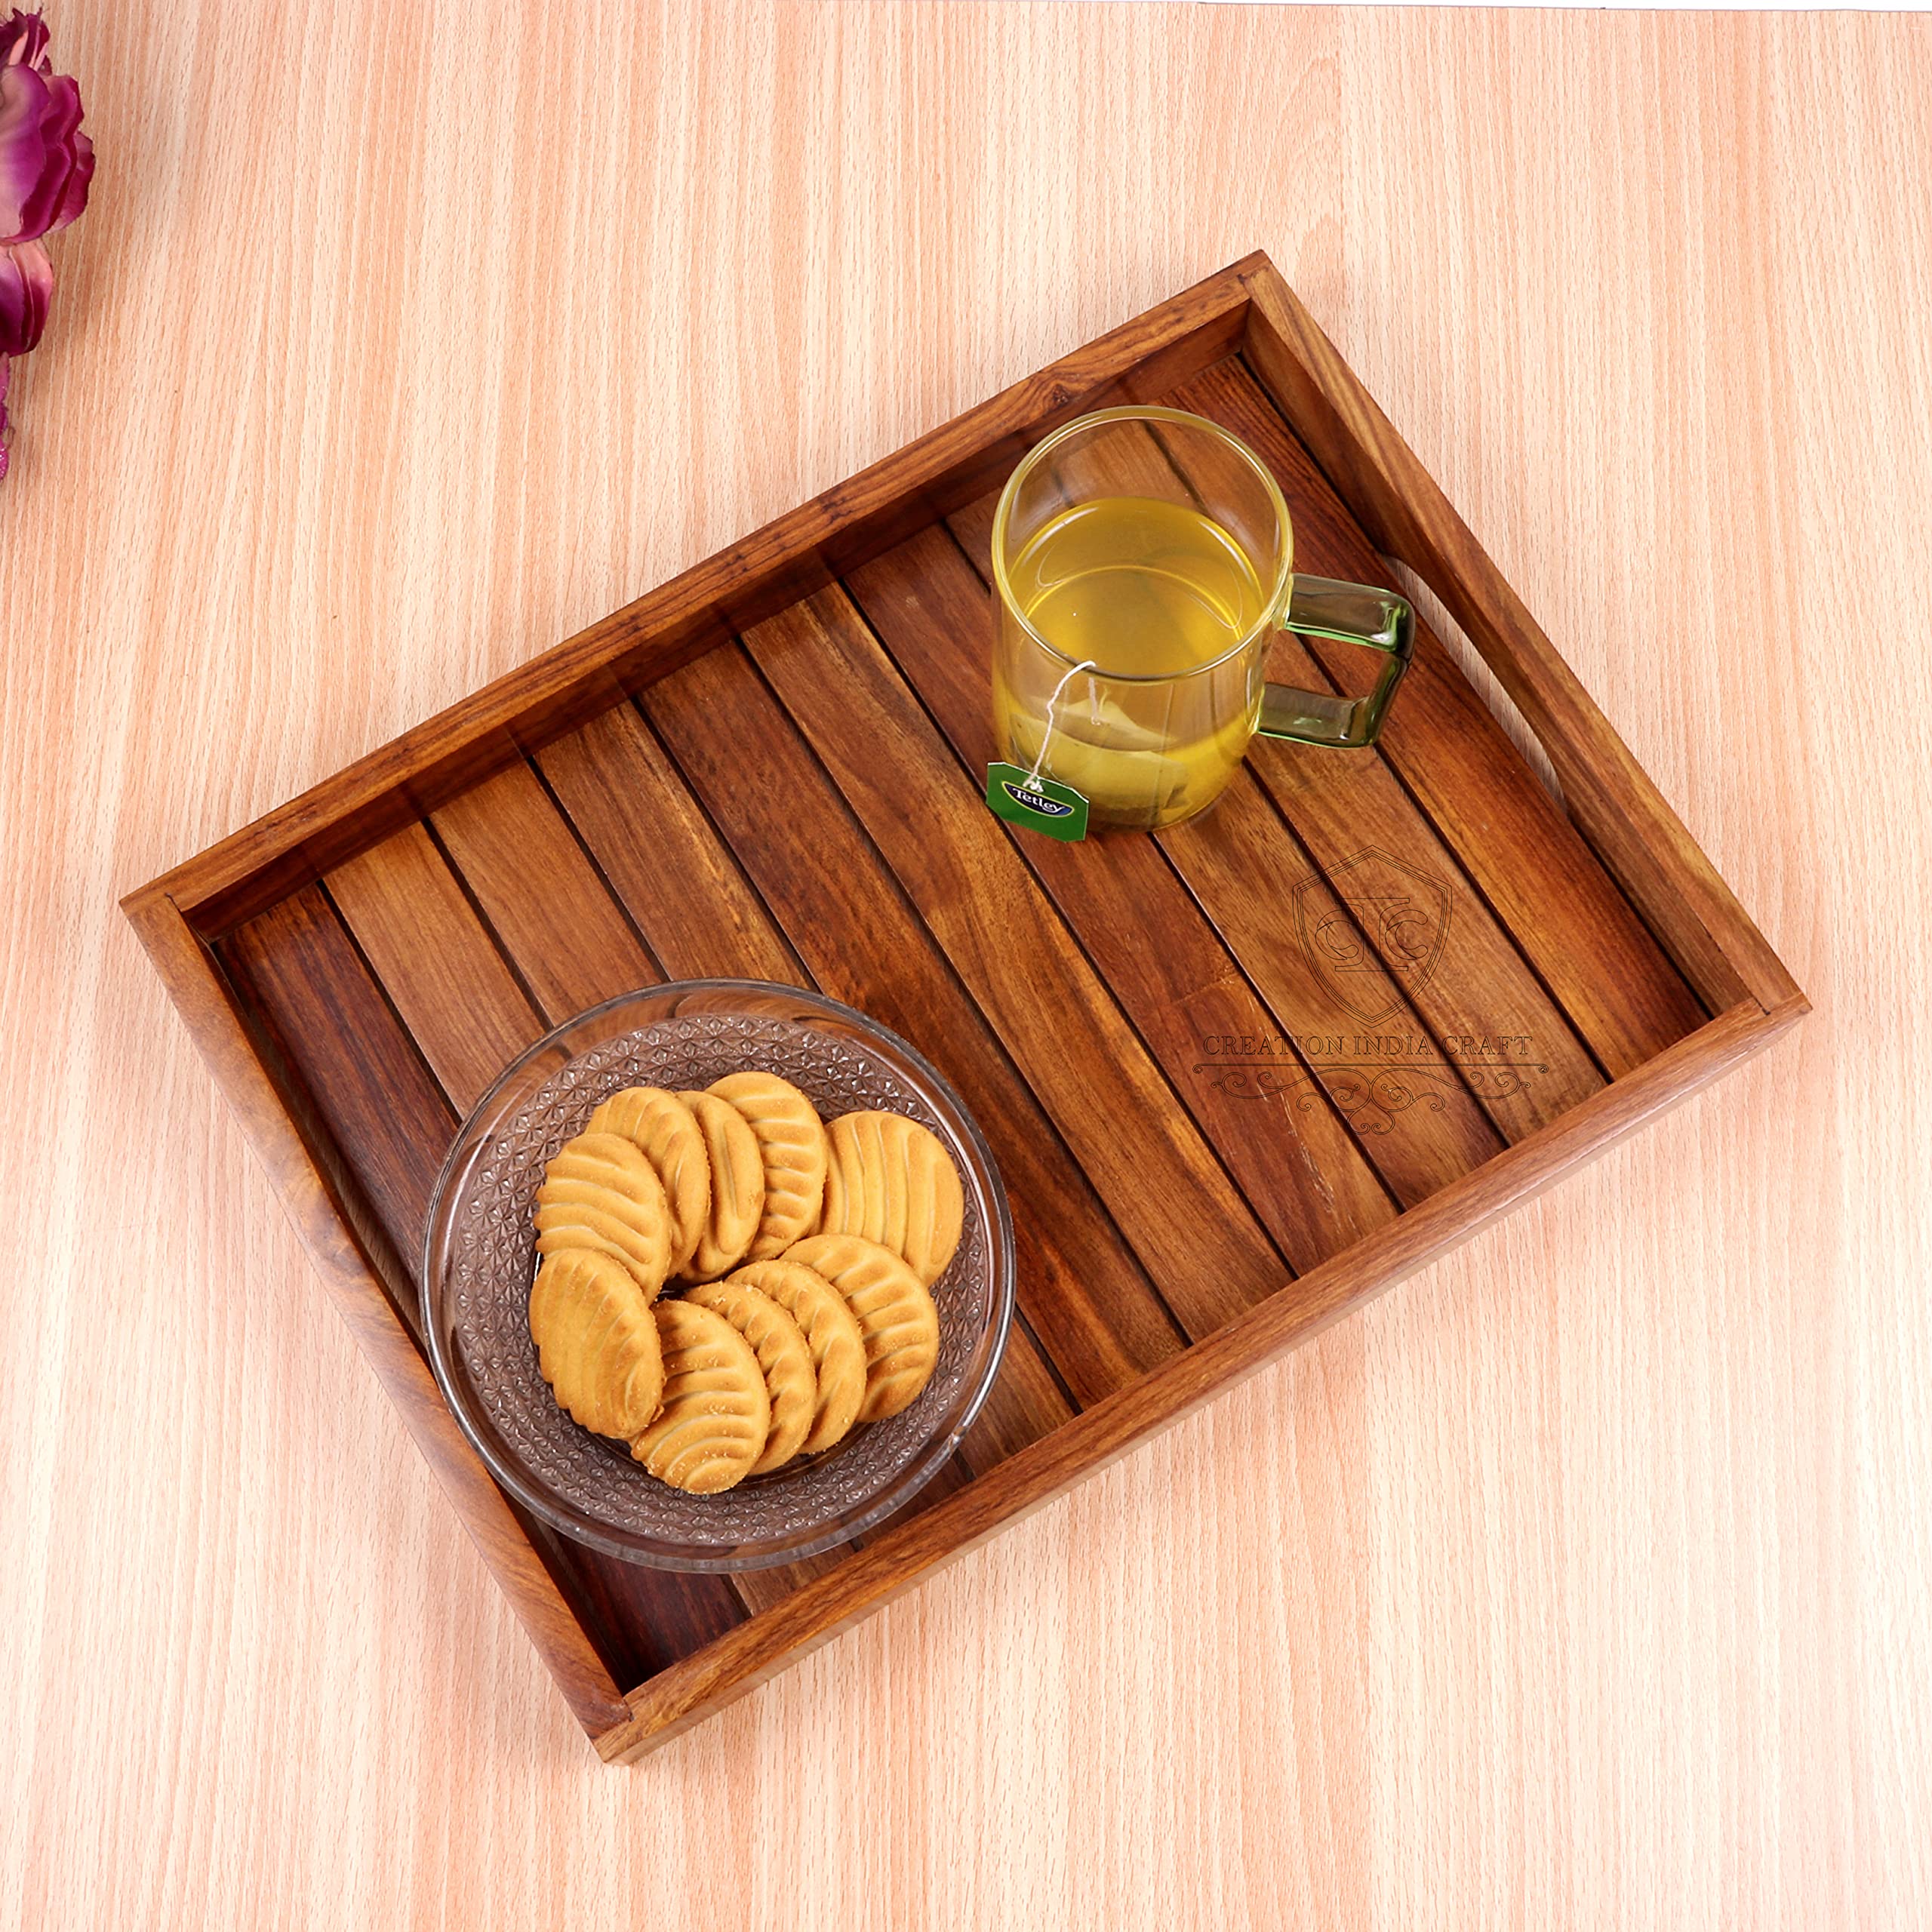 Wooden Tray Craft 1